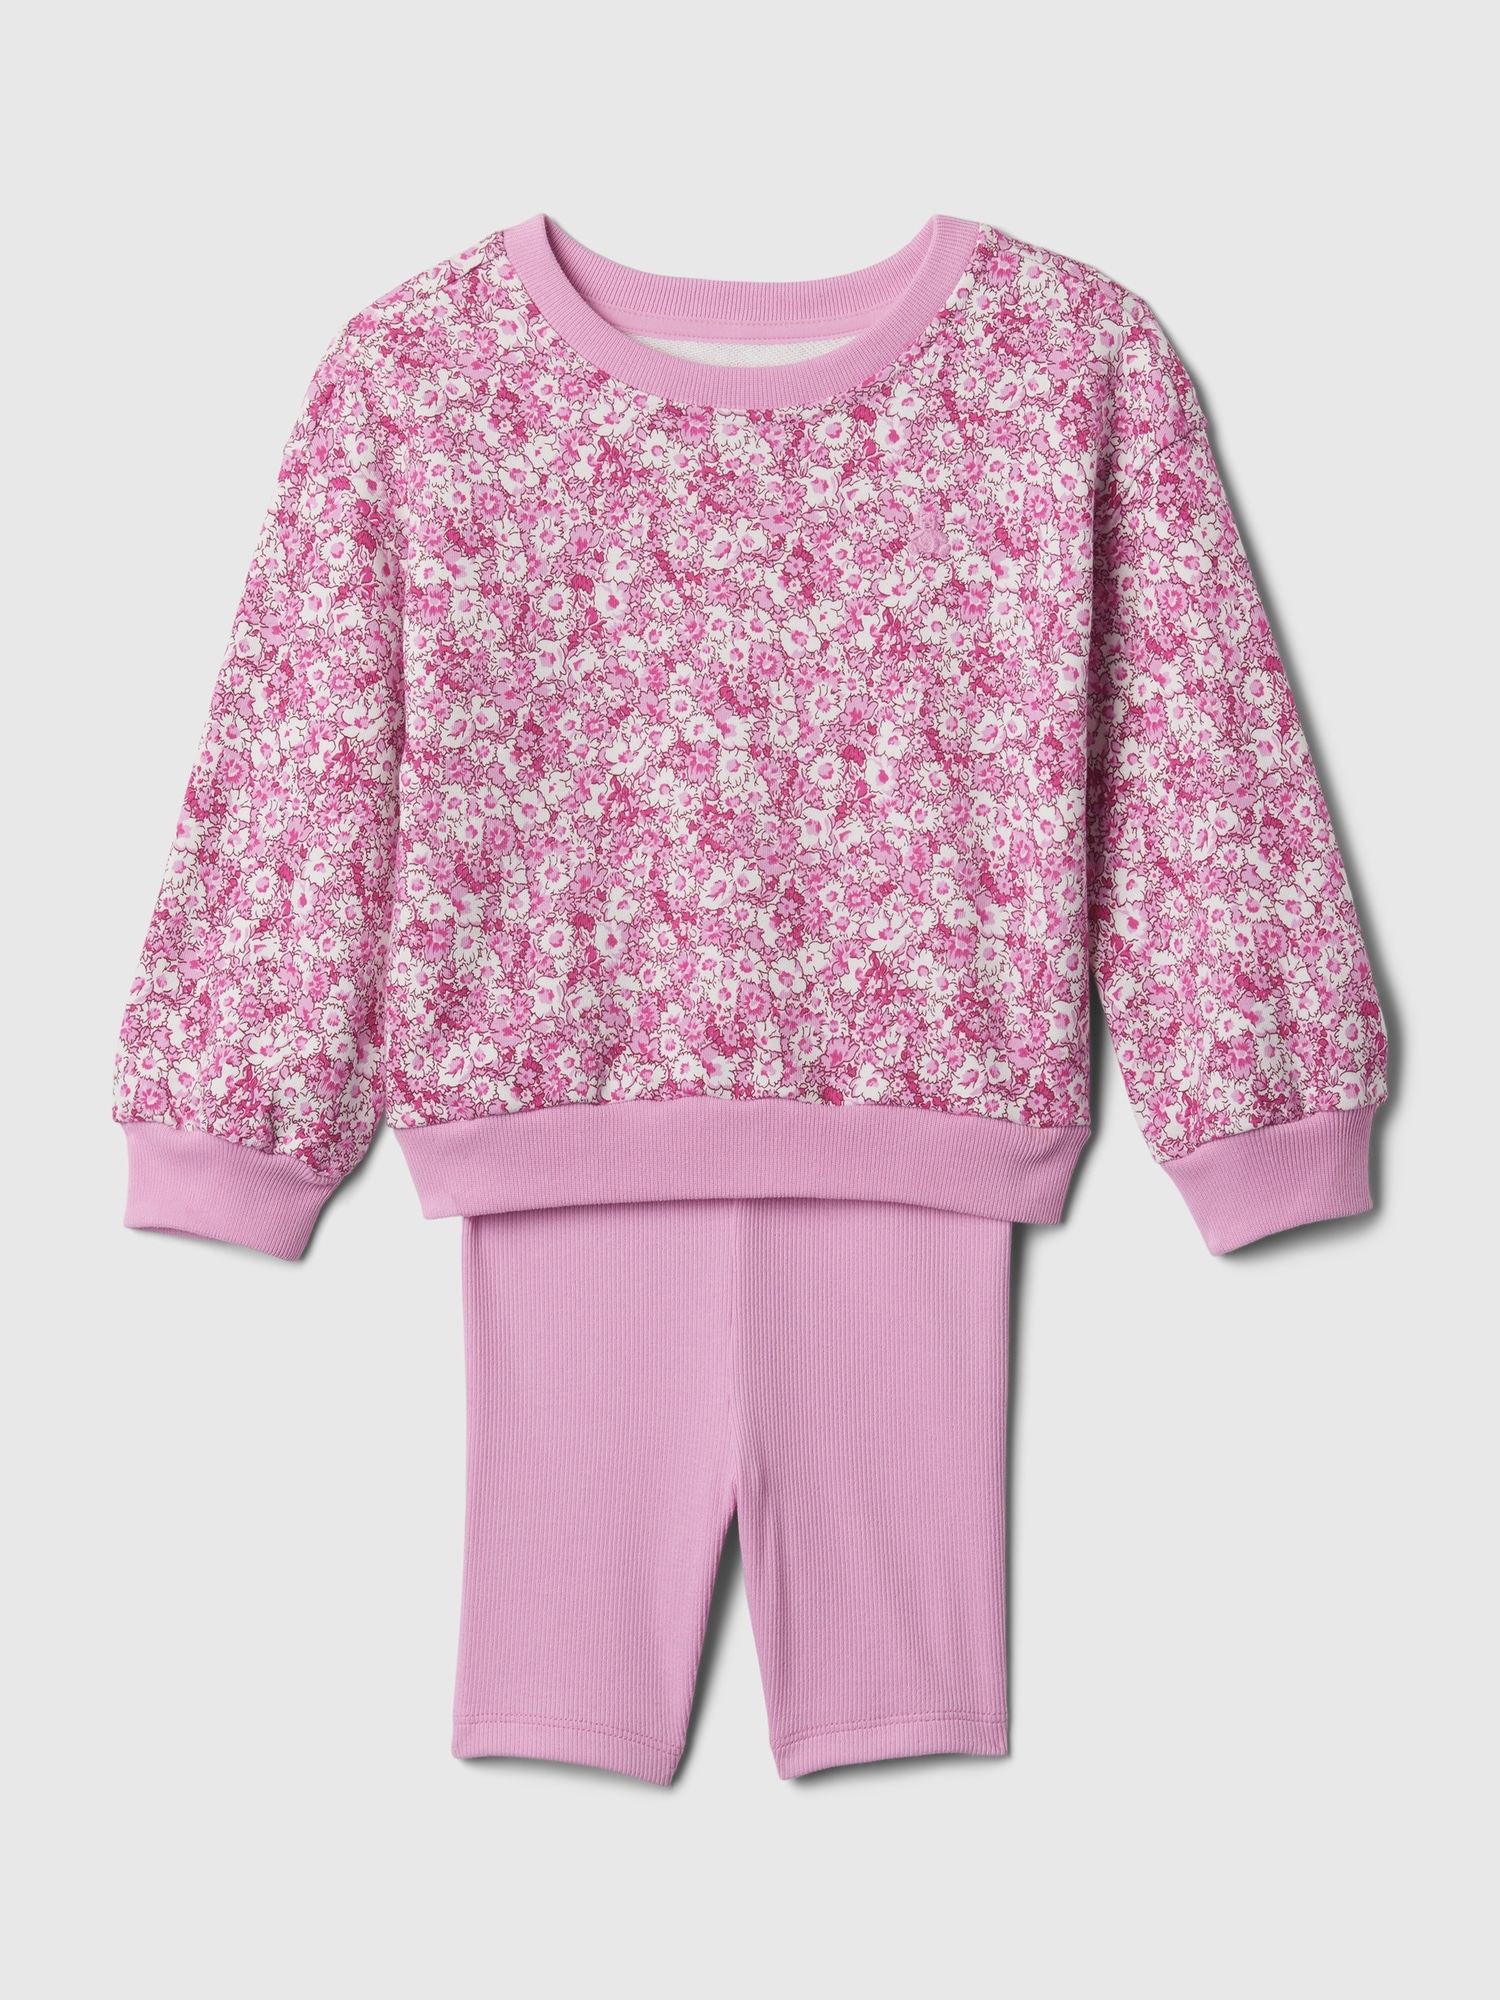 Gap Baby Two-piece Outfit Set In Pink Floral